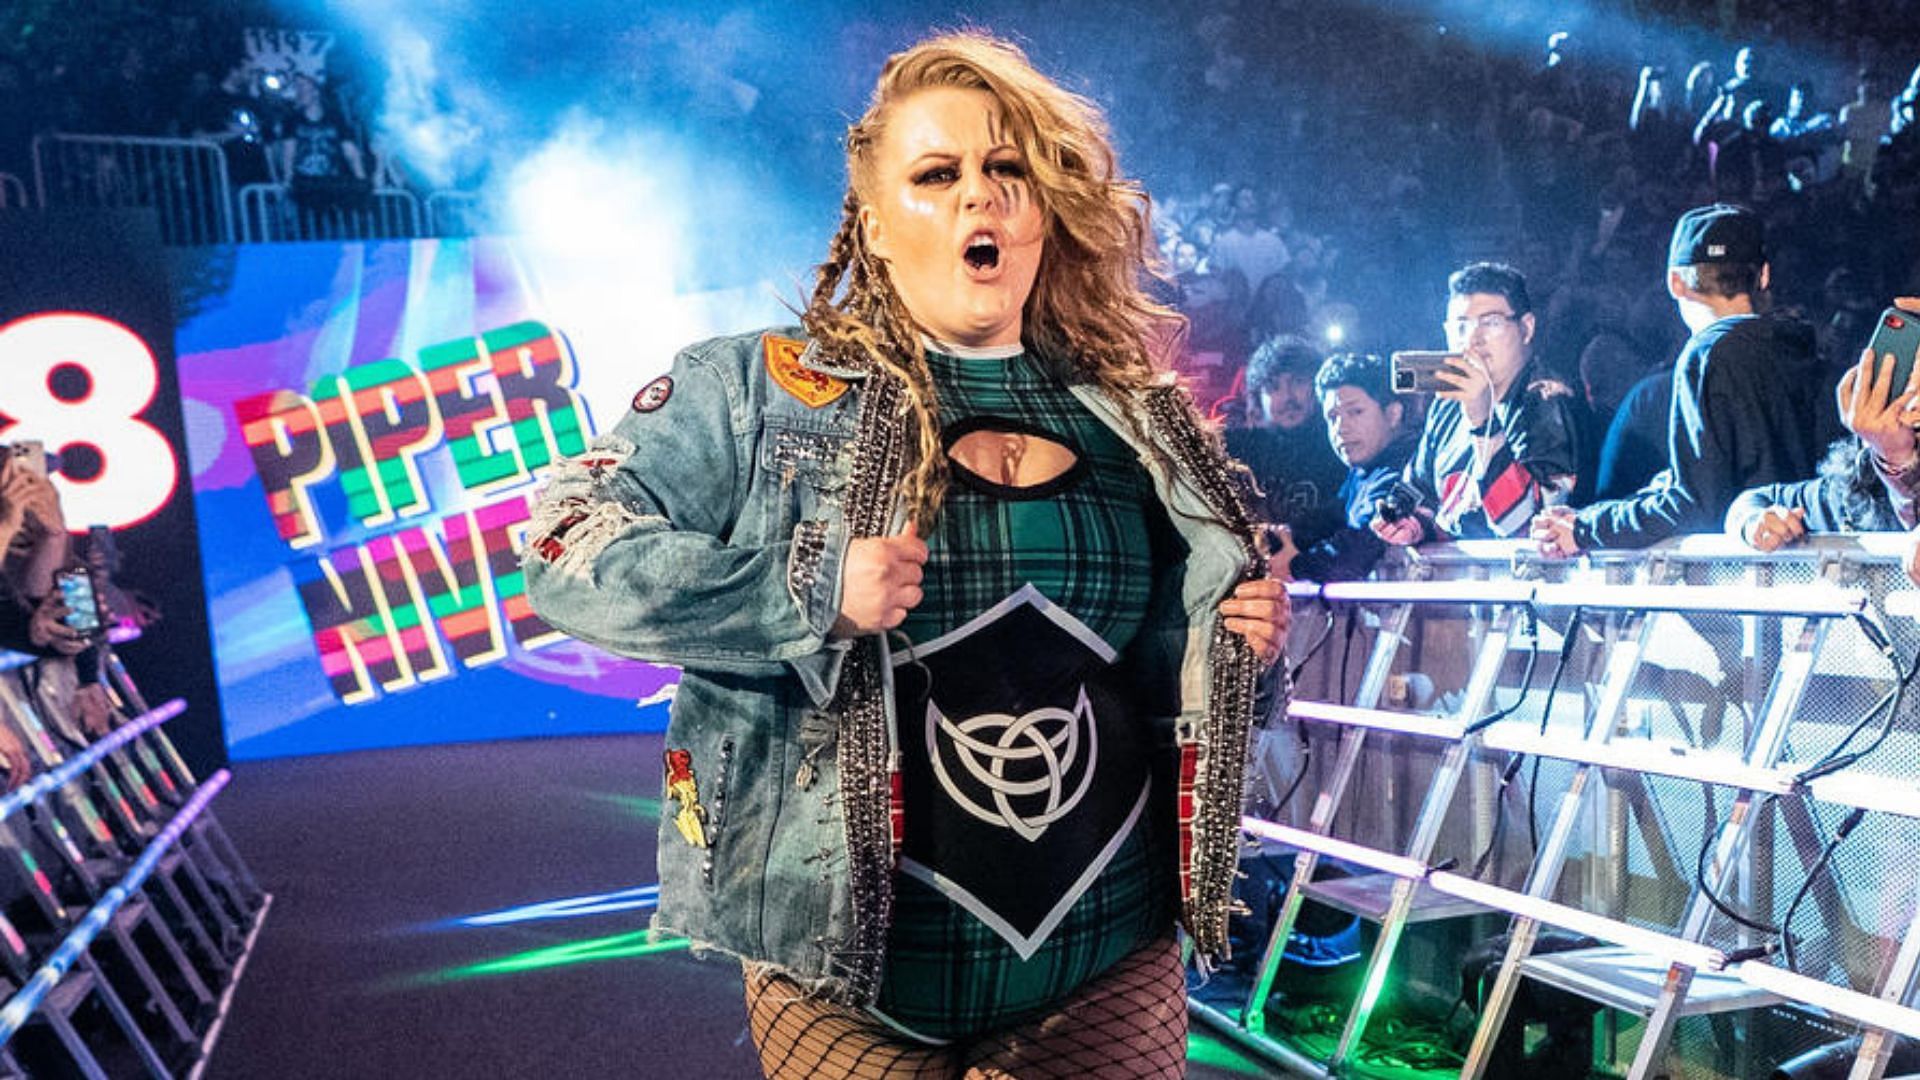 Piper Niven is one-half of the WWE Women